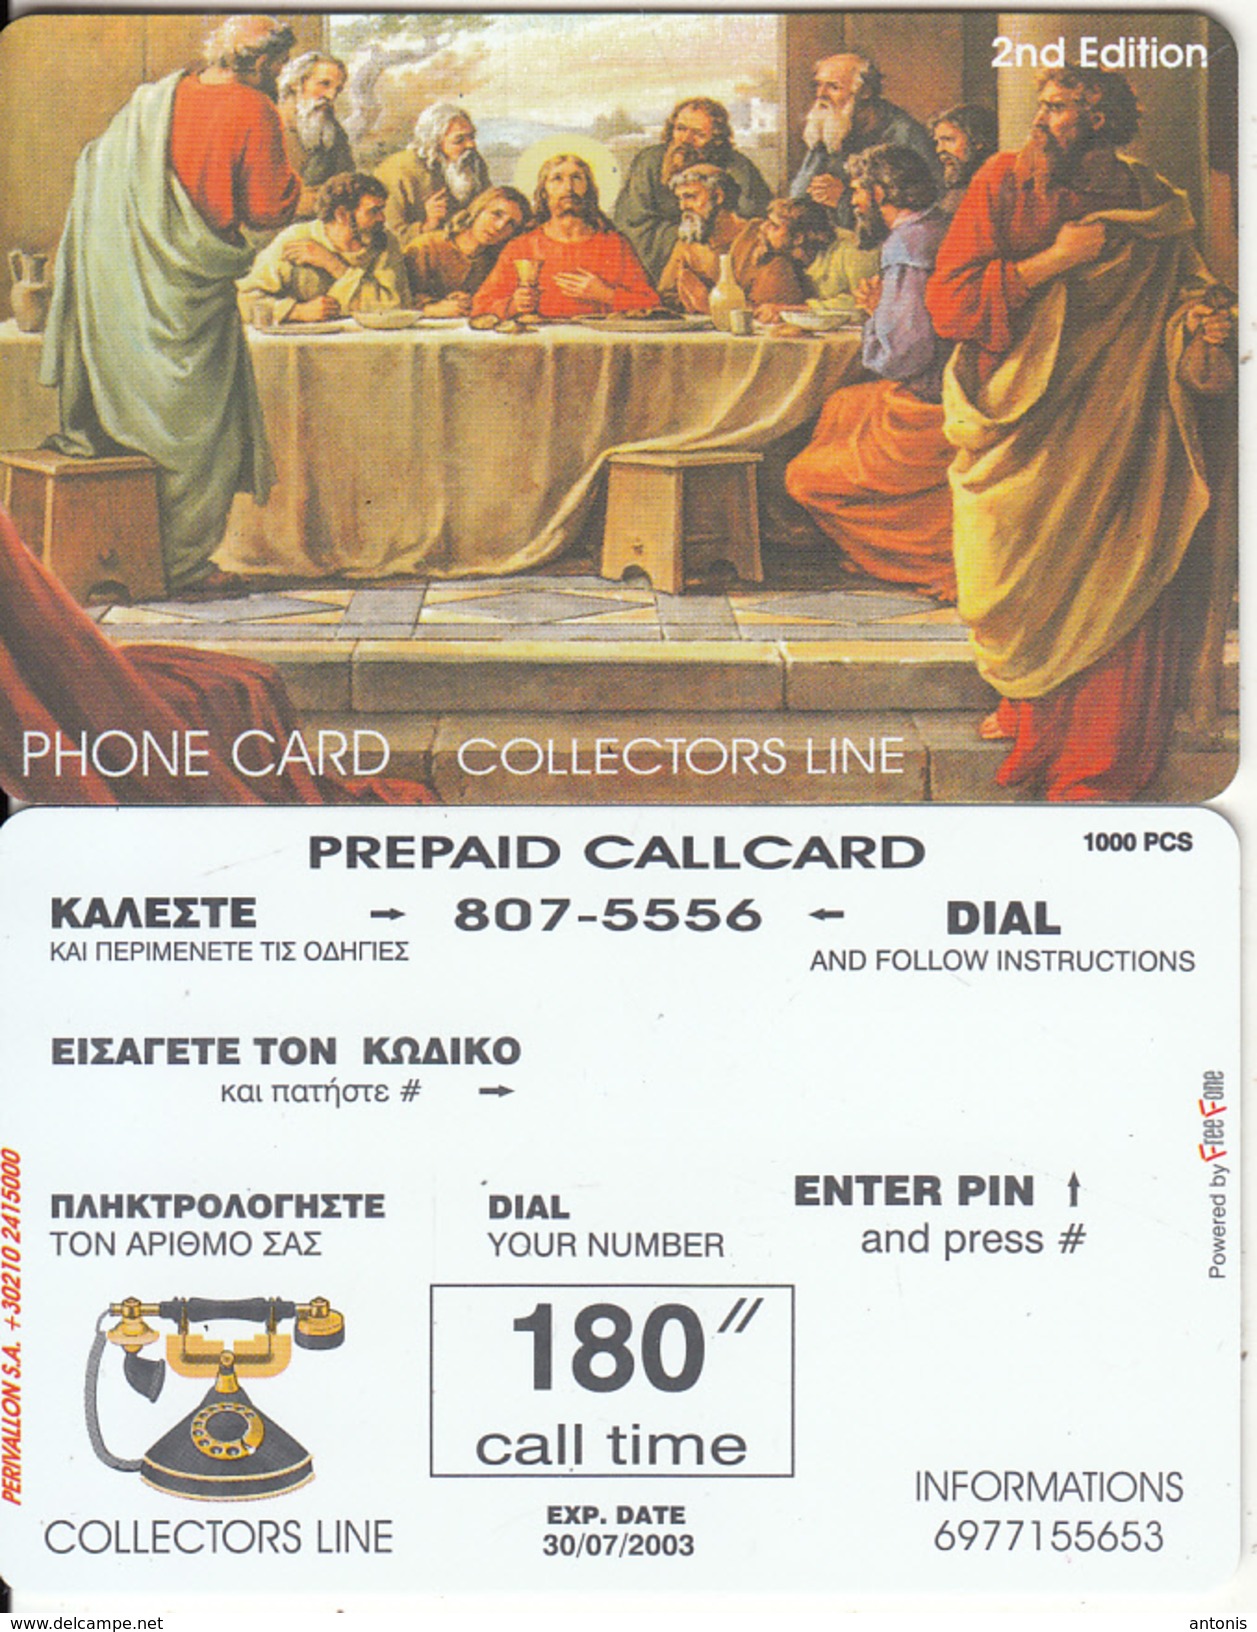 GREECE - Painting/Last Supper, Collectors Line Prepaid Card, Tirage 1000, Exp.date 30/07/03, Sample - Grecia